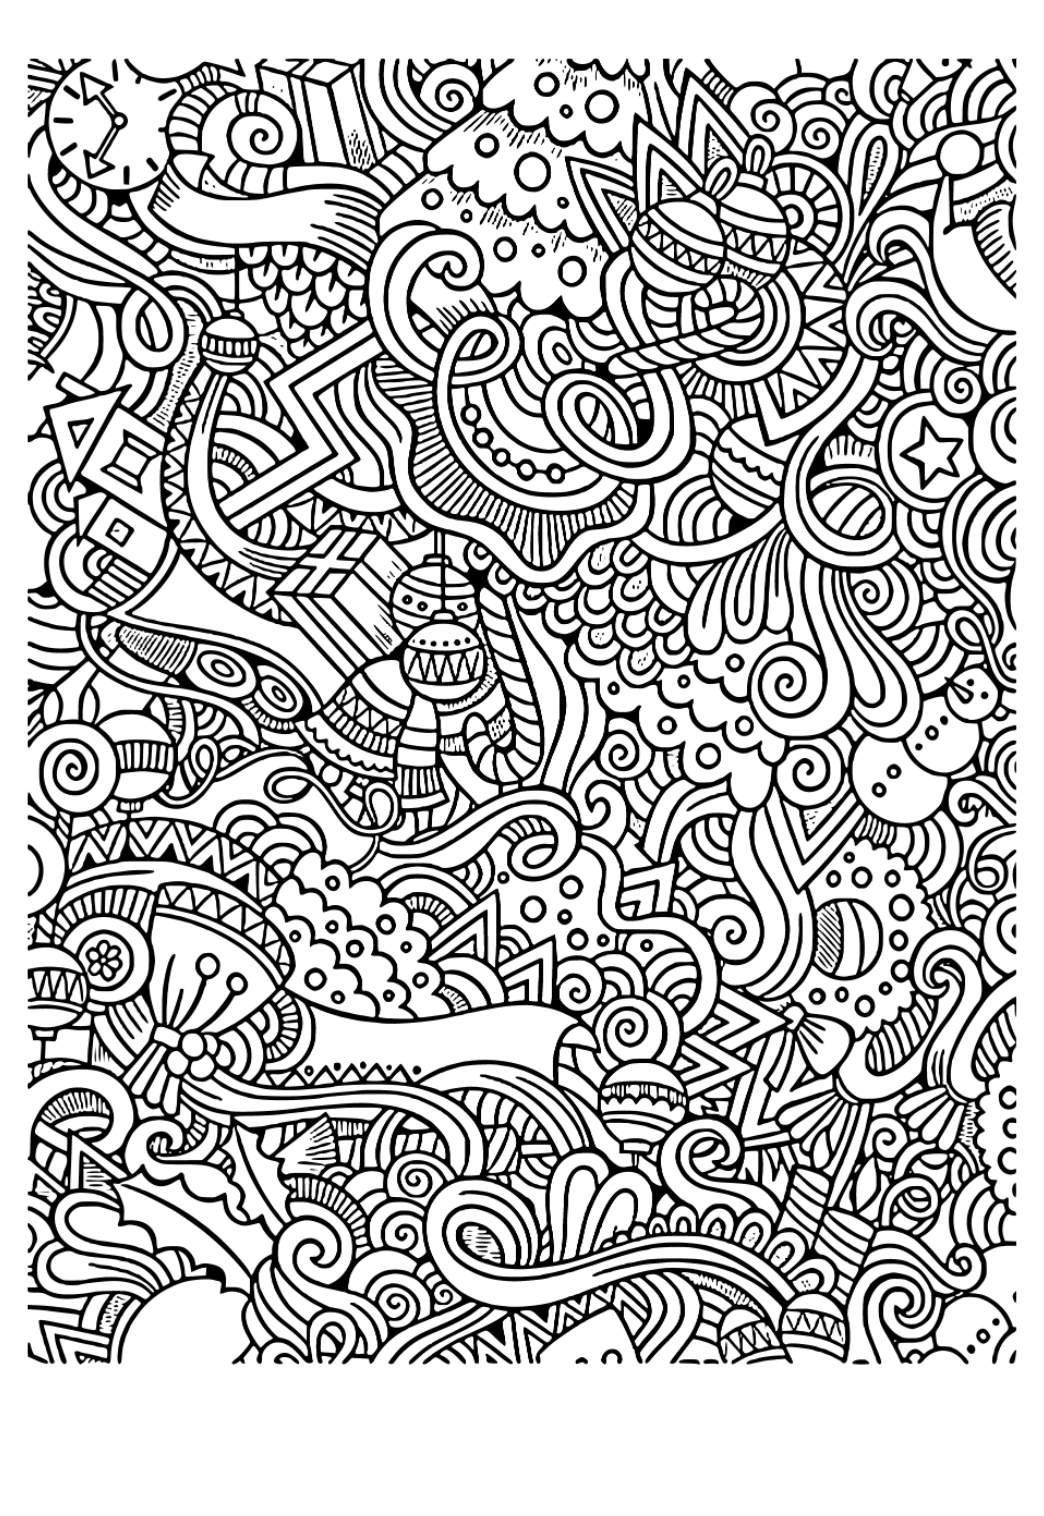 coloring pages : Colouring Patterns For Children Awesome 24 Awesome Image Coloring  Page Boys Colouring Patterns for Children ~ affiliateprogrambook.com